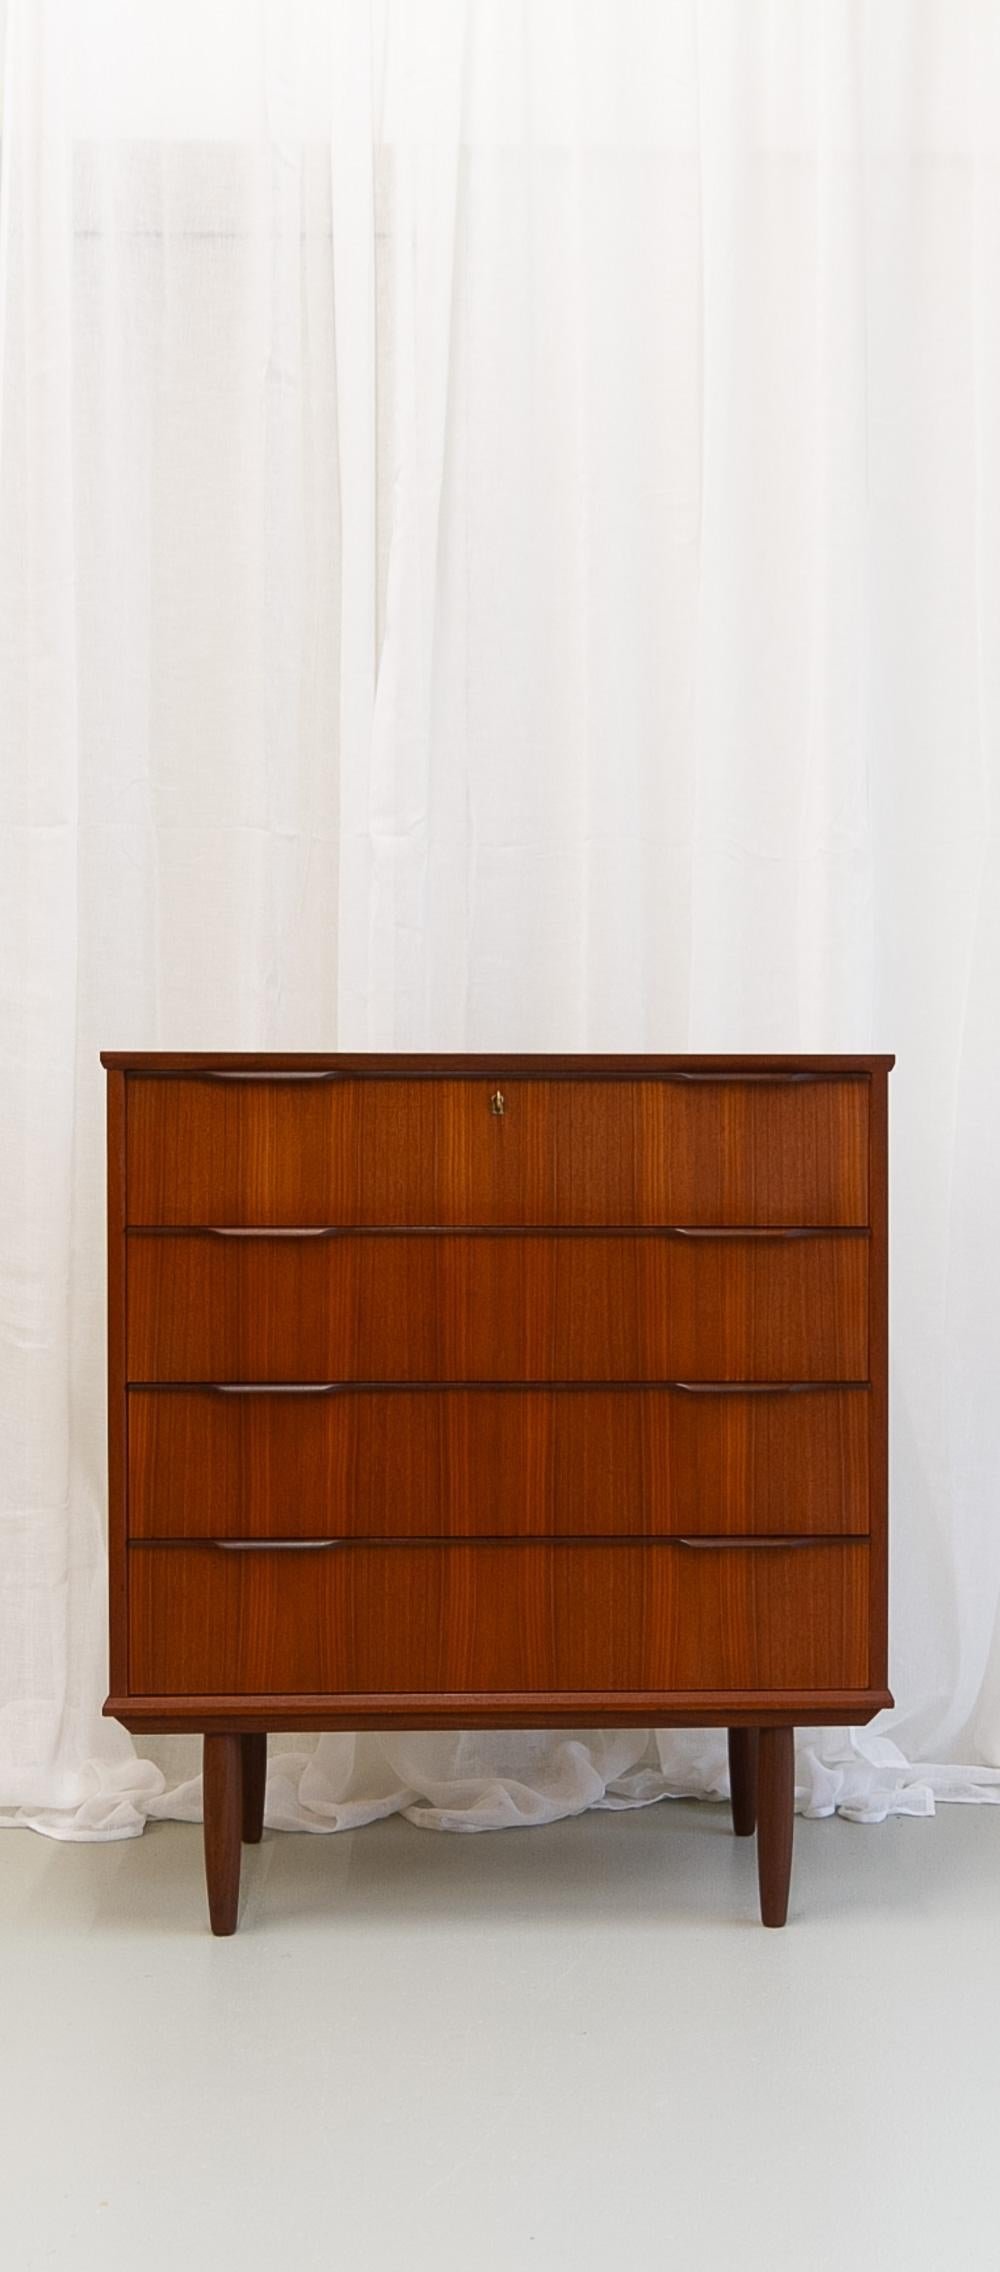 Danish Modern Teak Chest of Drawers, 1960s.
Classic Scandinavian Mid-Century Modern dresser with four wide drawers manufactured in Denmark in the 1960s.
Drawer fronts with beautiful matched veneer and sculpted pulls in solid teak. Top drawer with